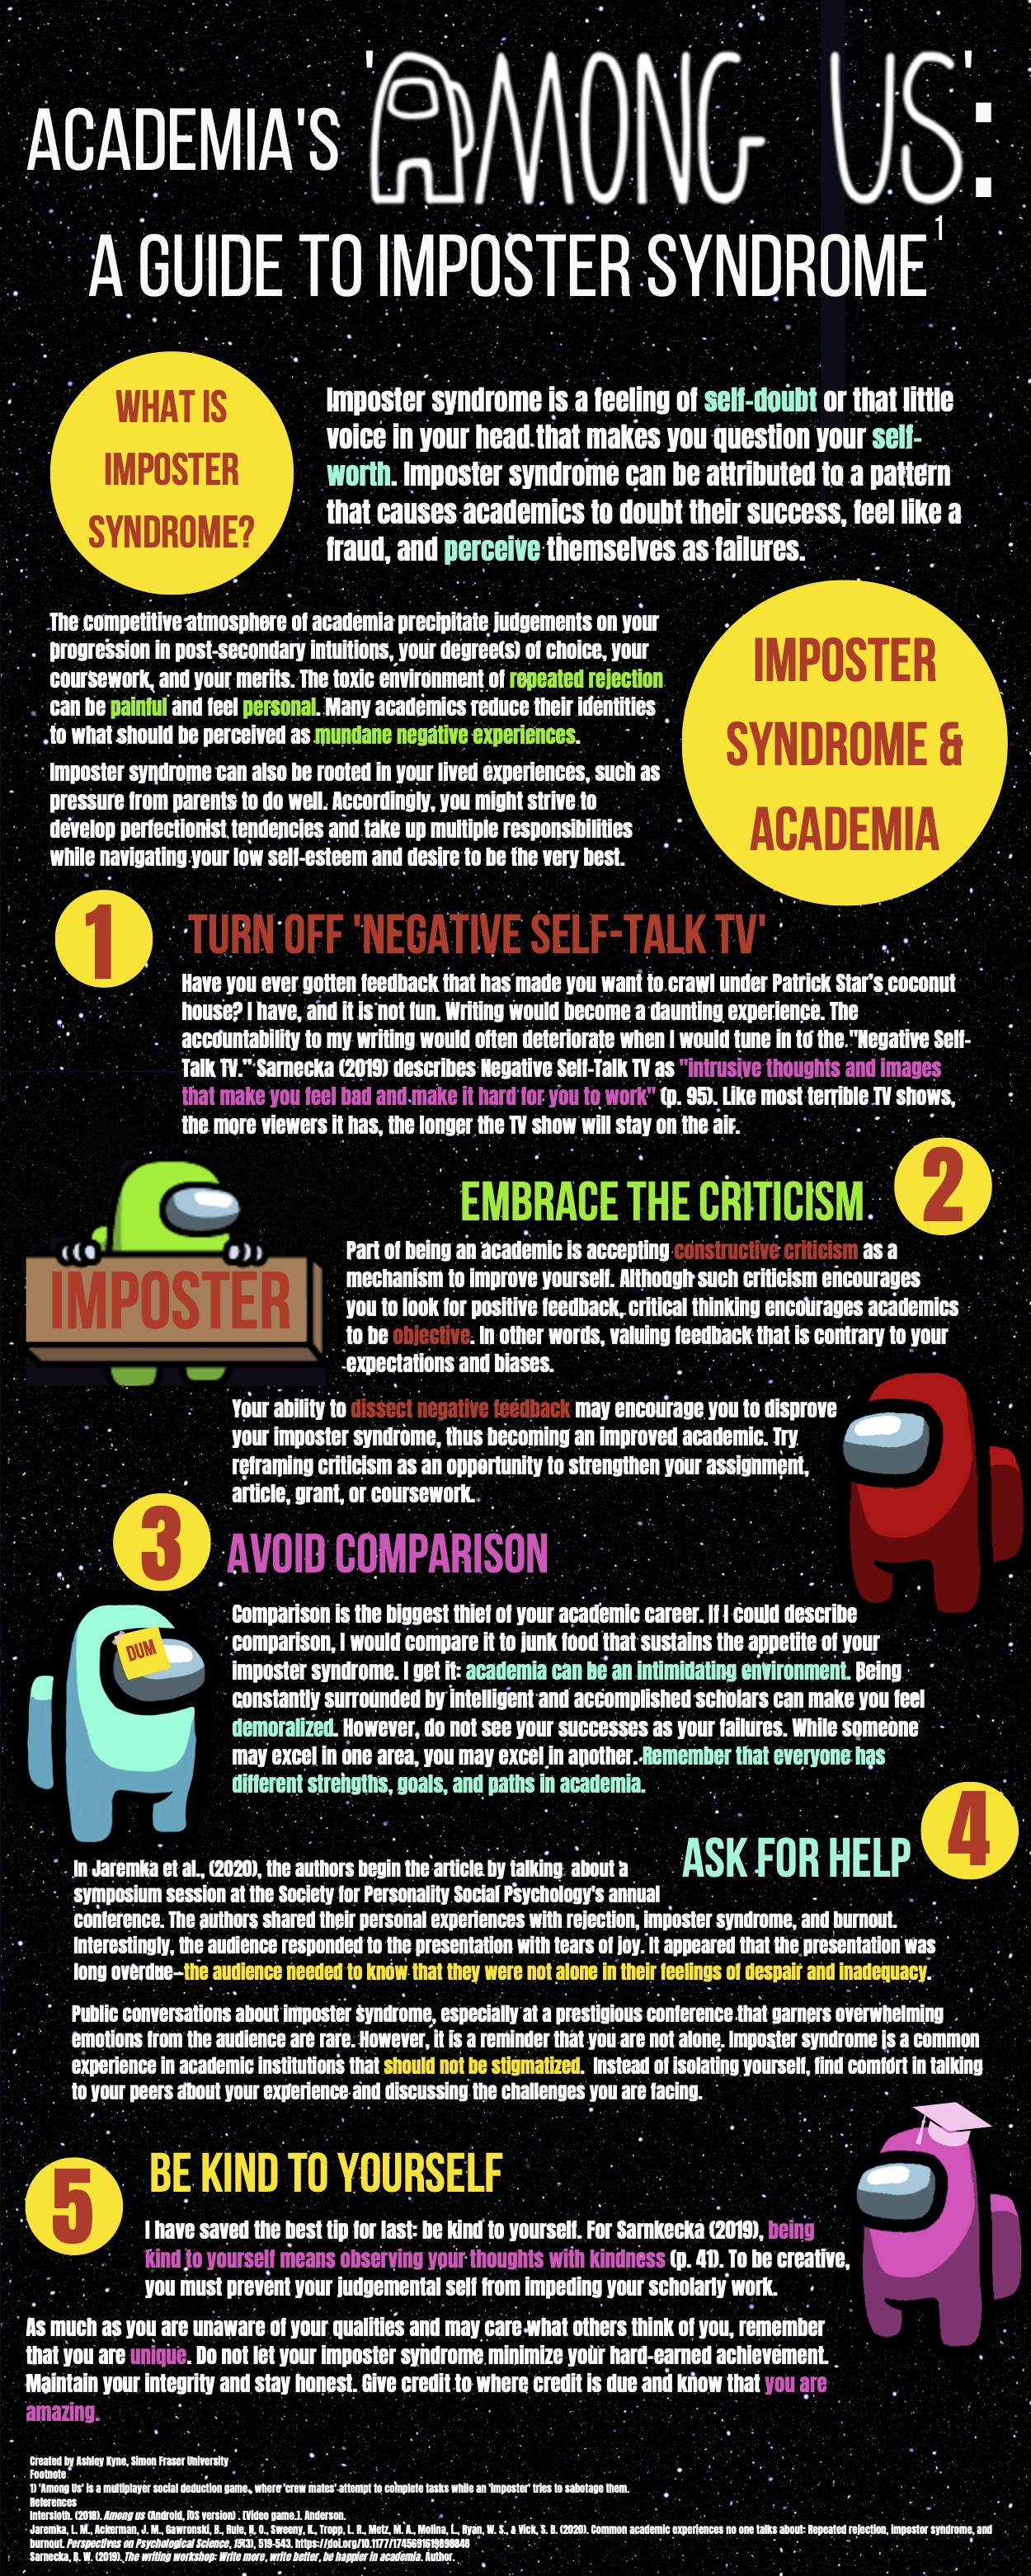 An infographic on a guide to imposter syndrome set to a black galaxy background outlining what it is, how it is manifested in academia, and 4 ways to overcome it